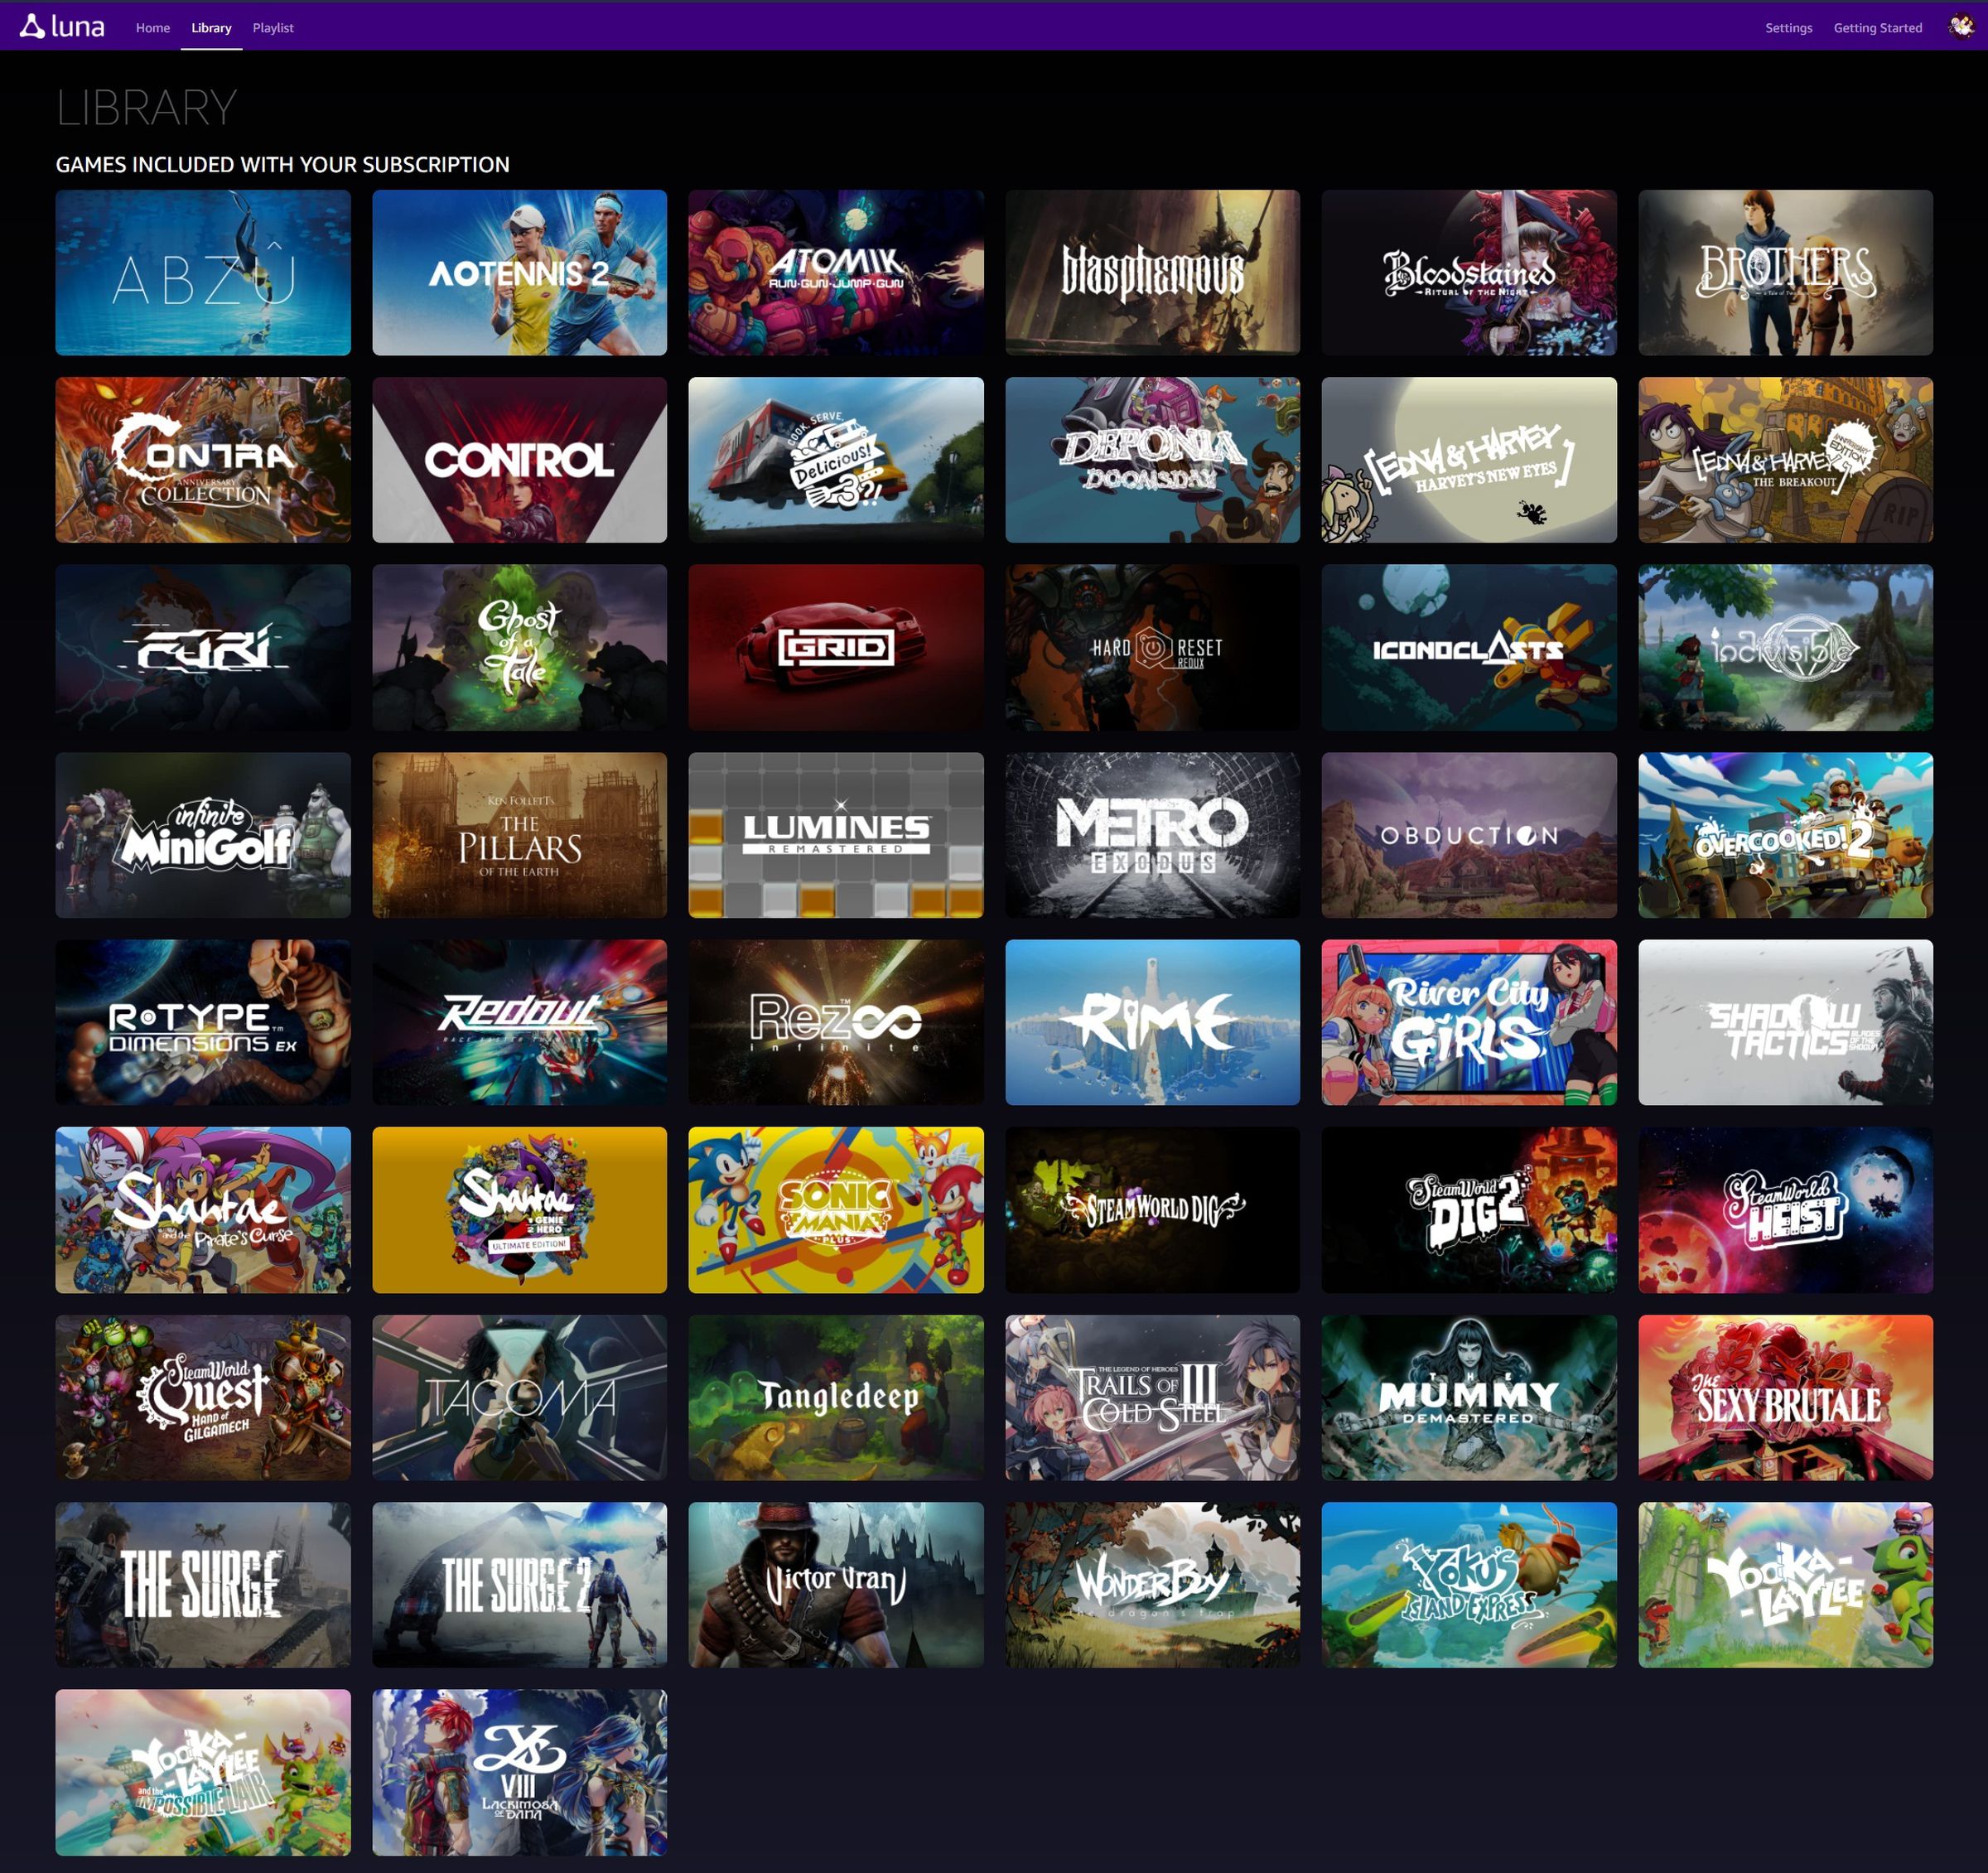 The 50 games current available in the Luna Plus channel.